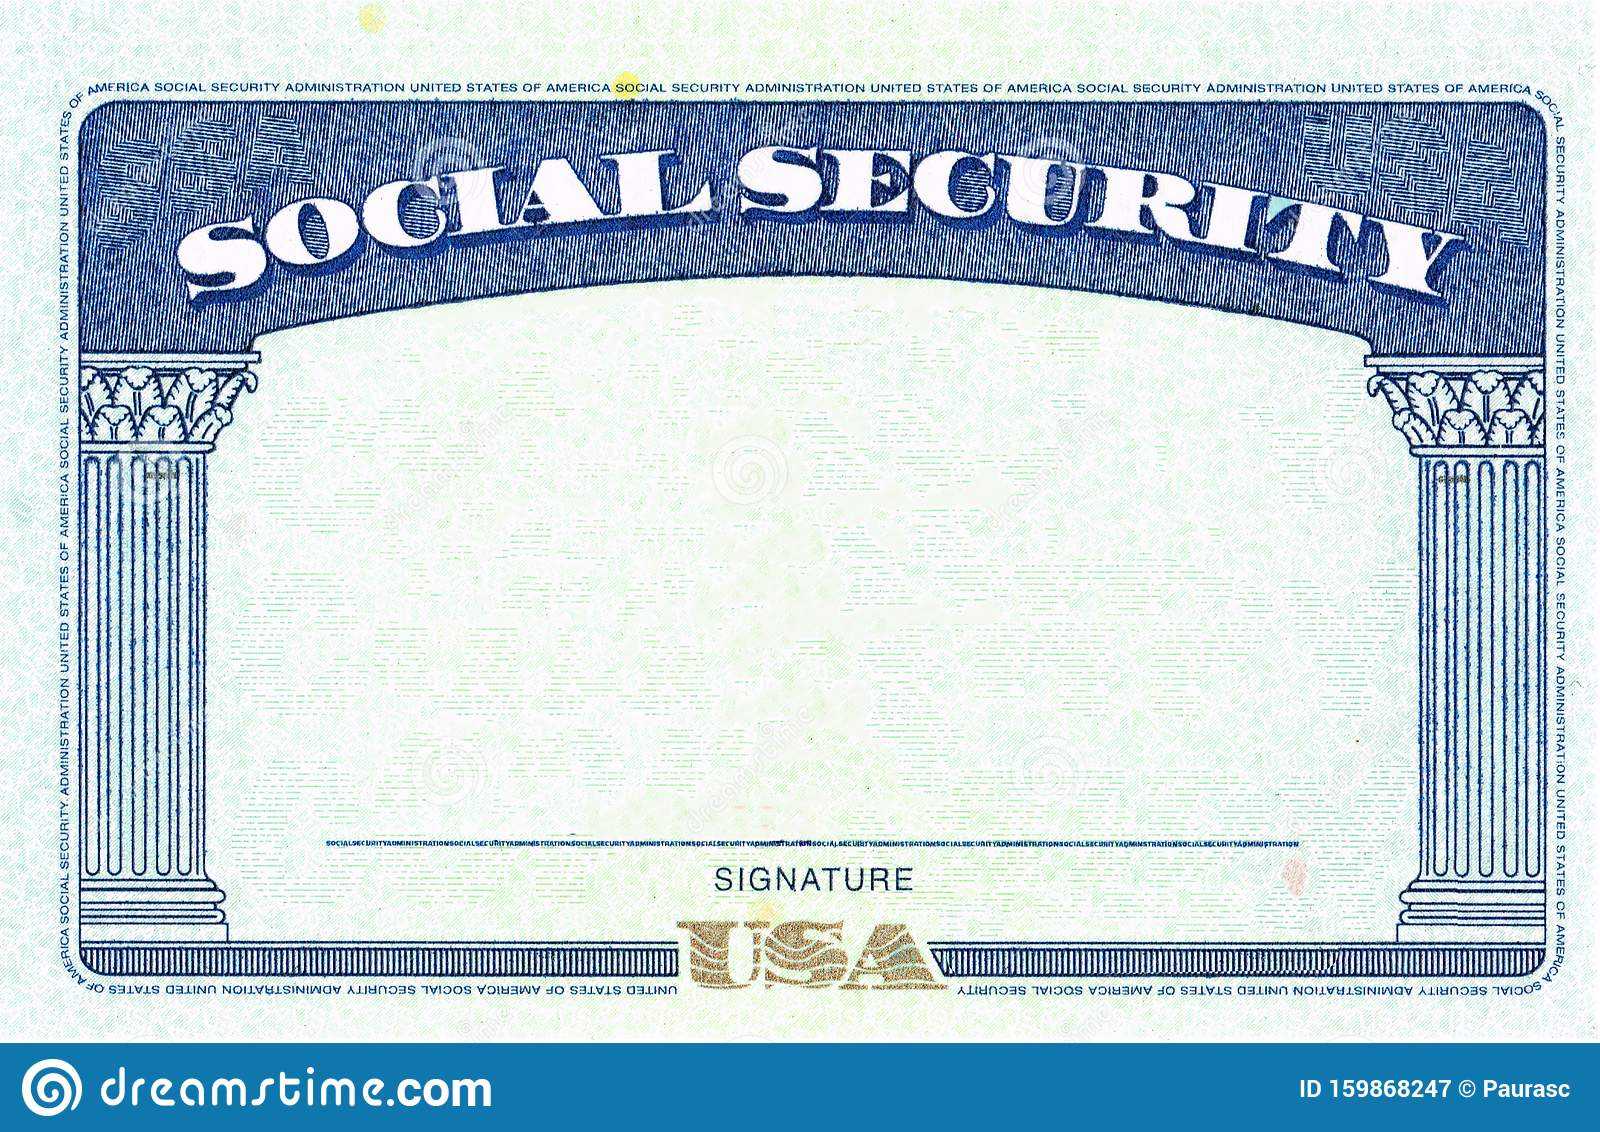 Social Security Card Blank Stock Image. Image Of Emigration Pertaining To Blank Social Security Card Template Download